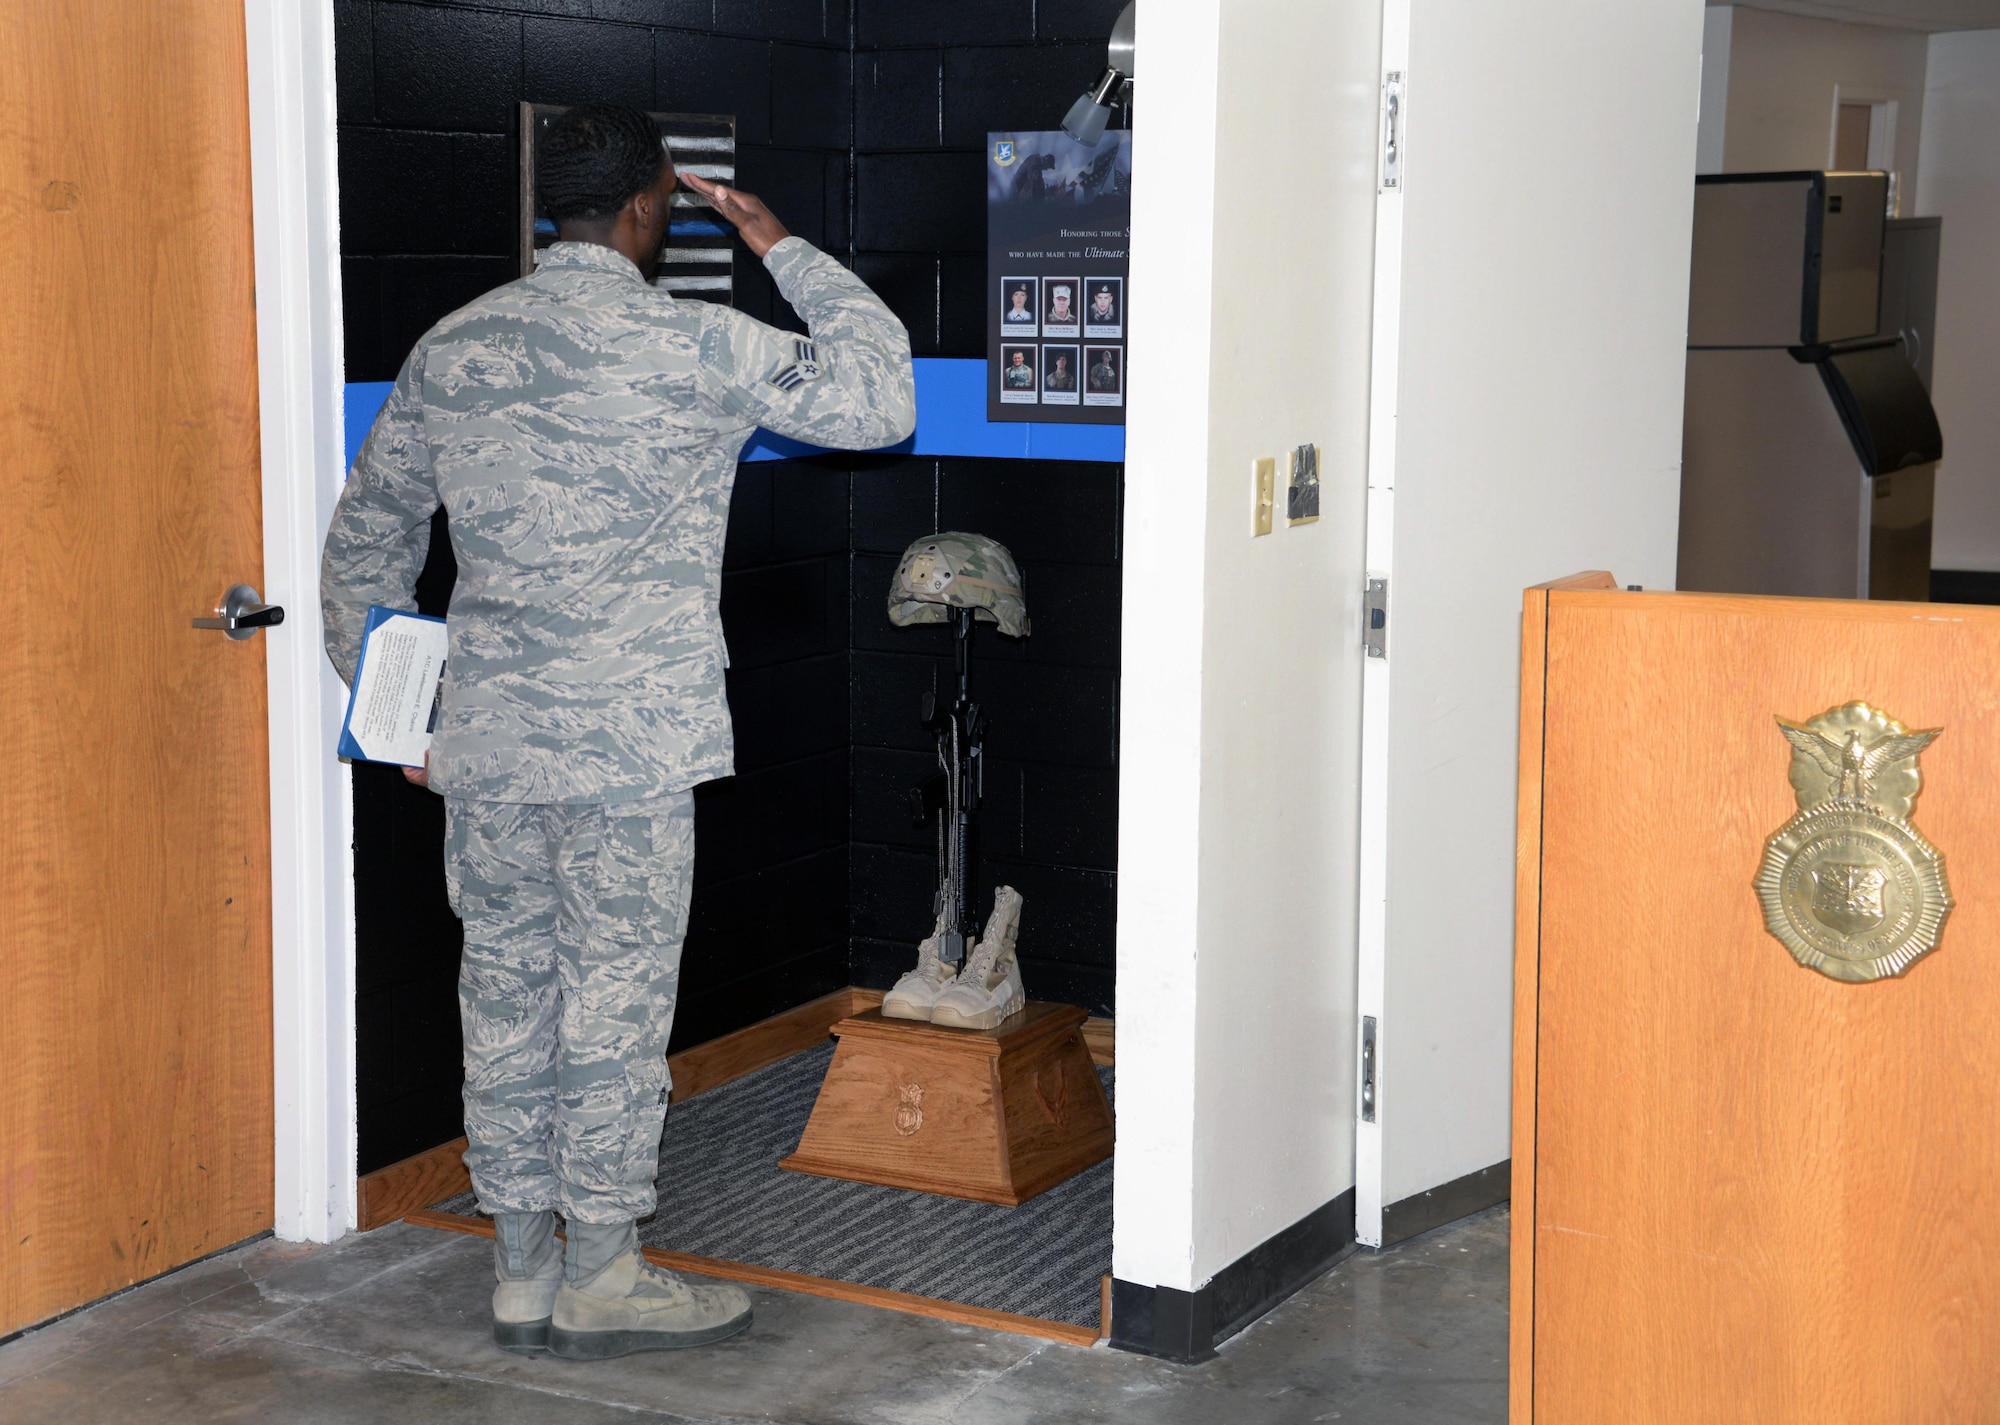 The 82nd Security Forces Squadron held a ceremony at Sheppard Air Force Base, Texas, May 17, 2017, which honored defenders who have made the ultimate sacrifice serving their country. Senior Airman Earnest Jackson Jr., 82nd SFS combat arms instructor, salutes the battlefield cross, which holds the dog tags of fallen defenders. (U.S. Air Force photo by Senior Airman Robert L. McIlrath)